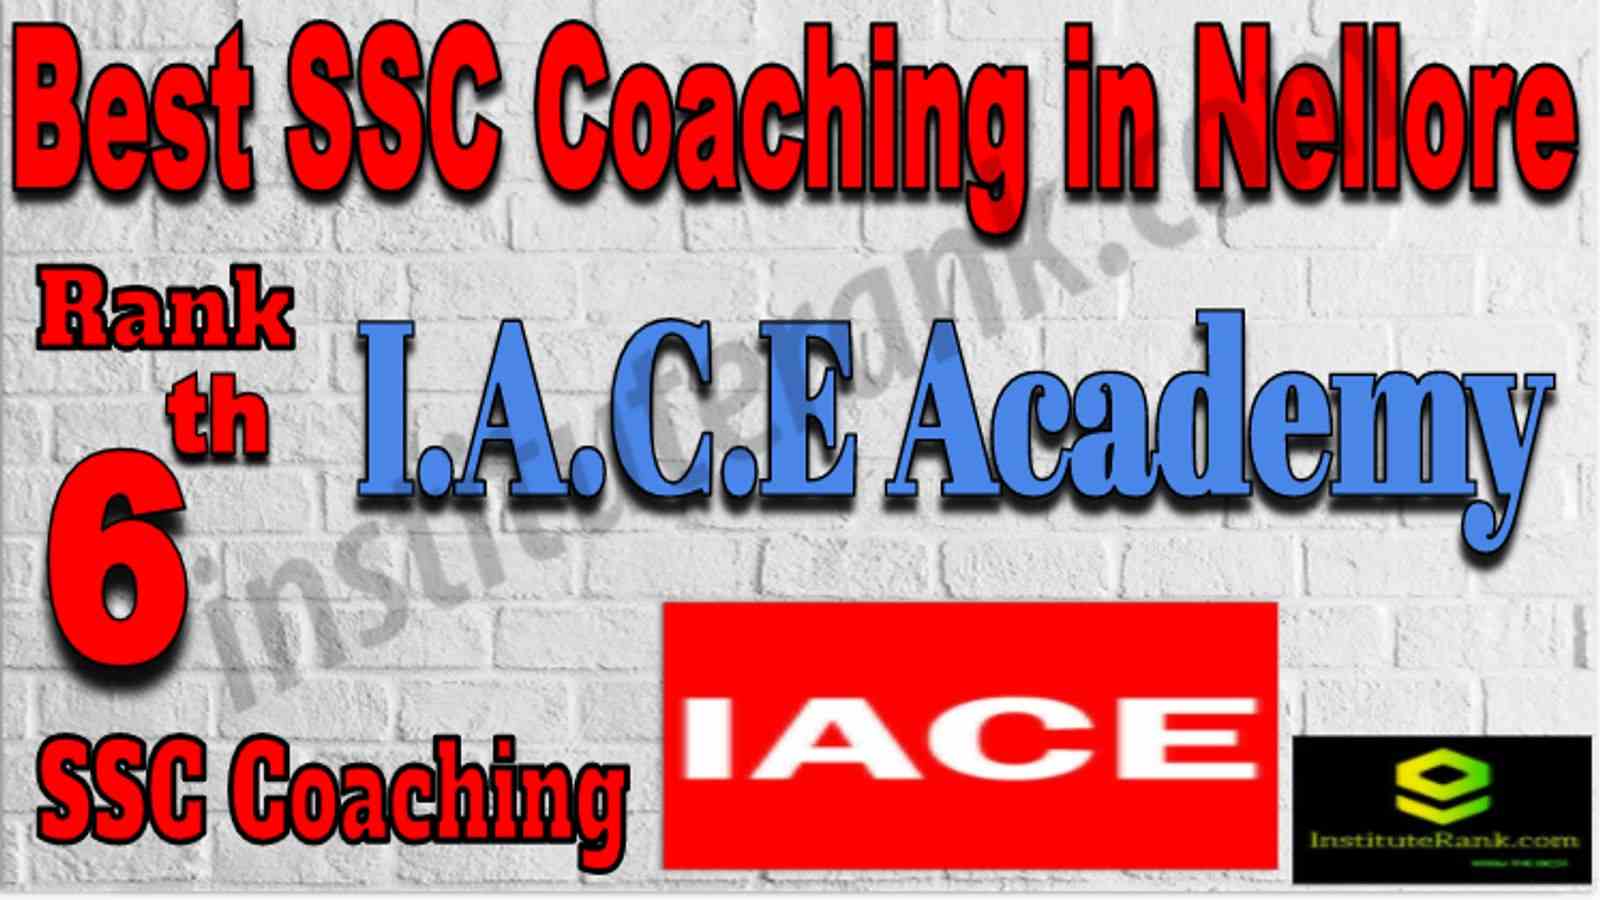 Rank 6 Best SSC Coaching in Nellore